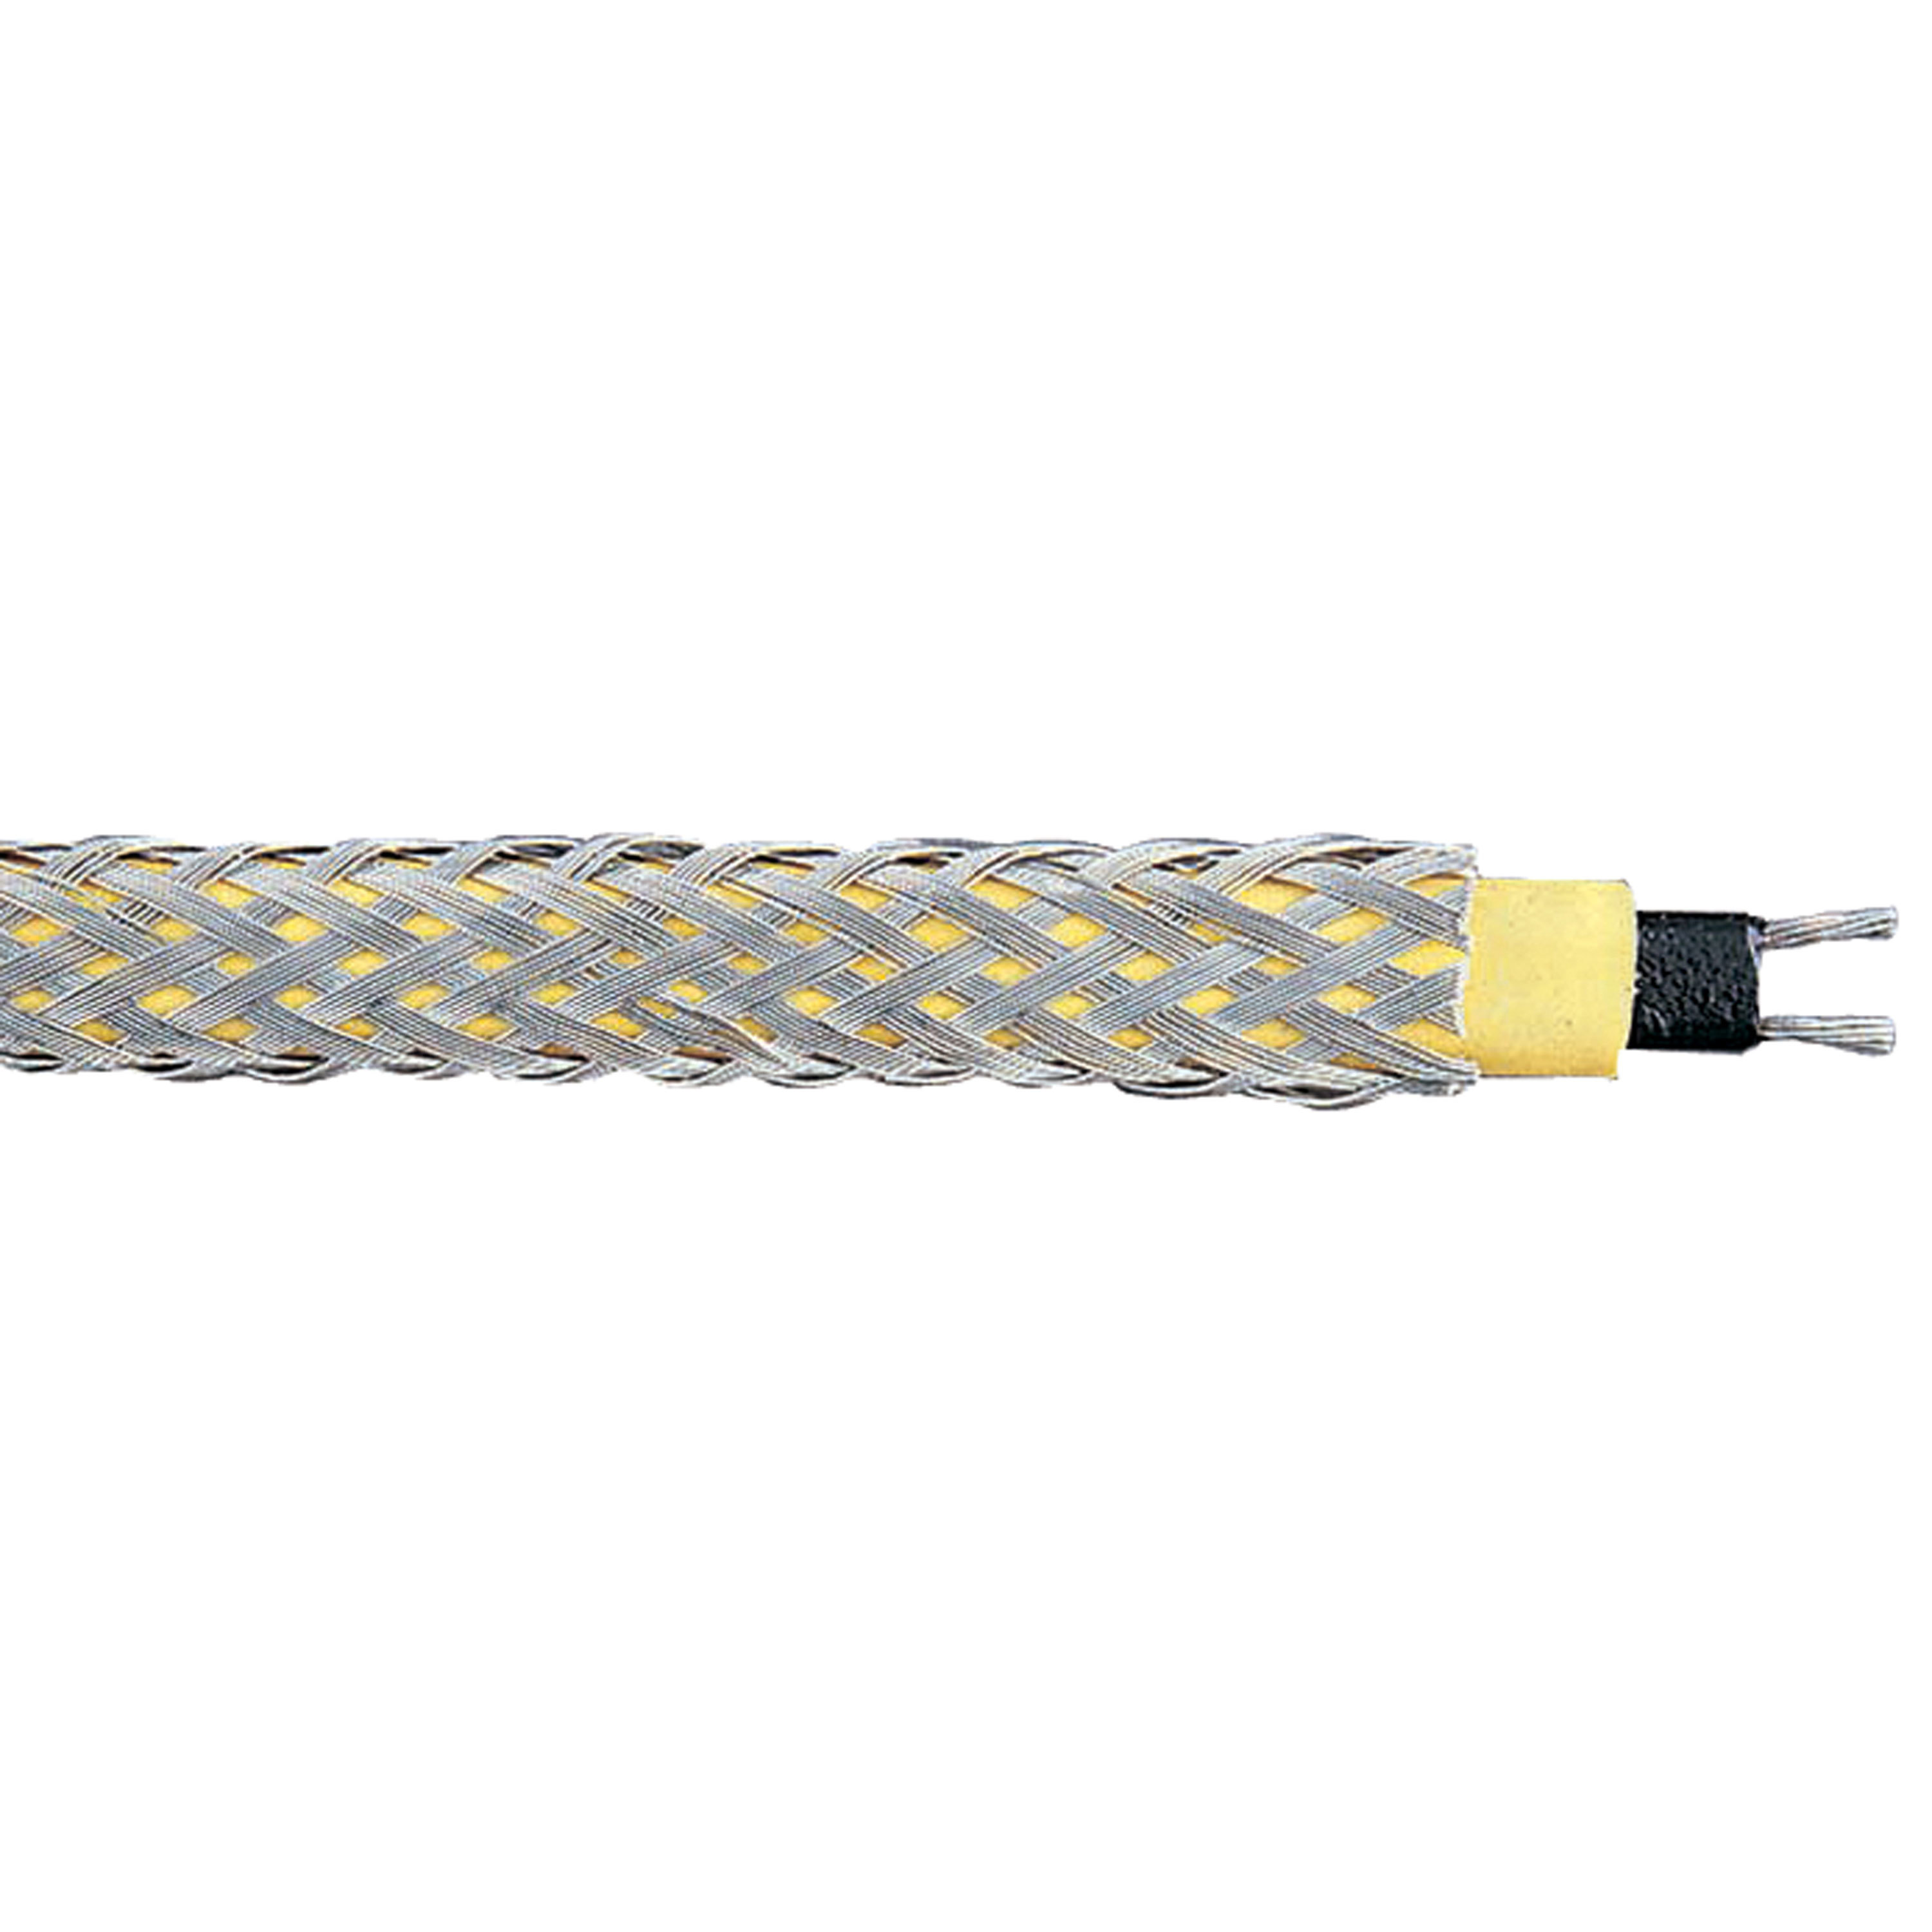 Easy Heat 2102 100' Freeze Free Pipe Heating Cable - image 2 of 2